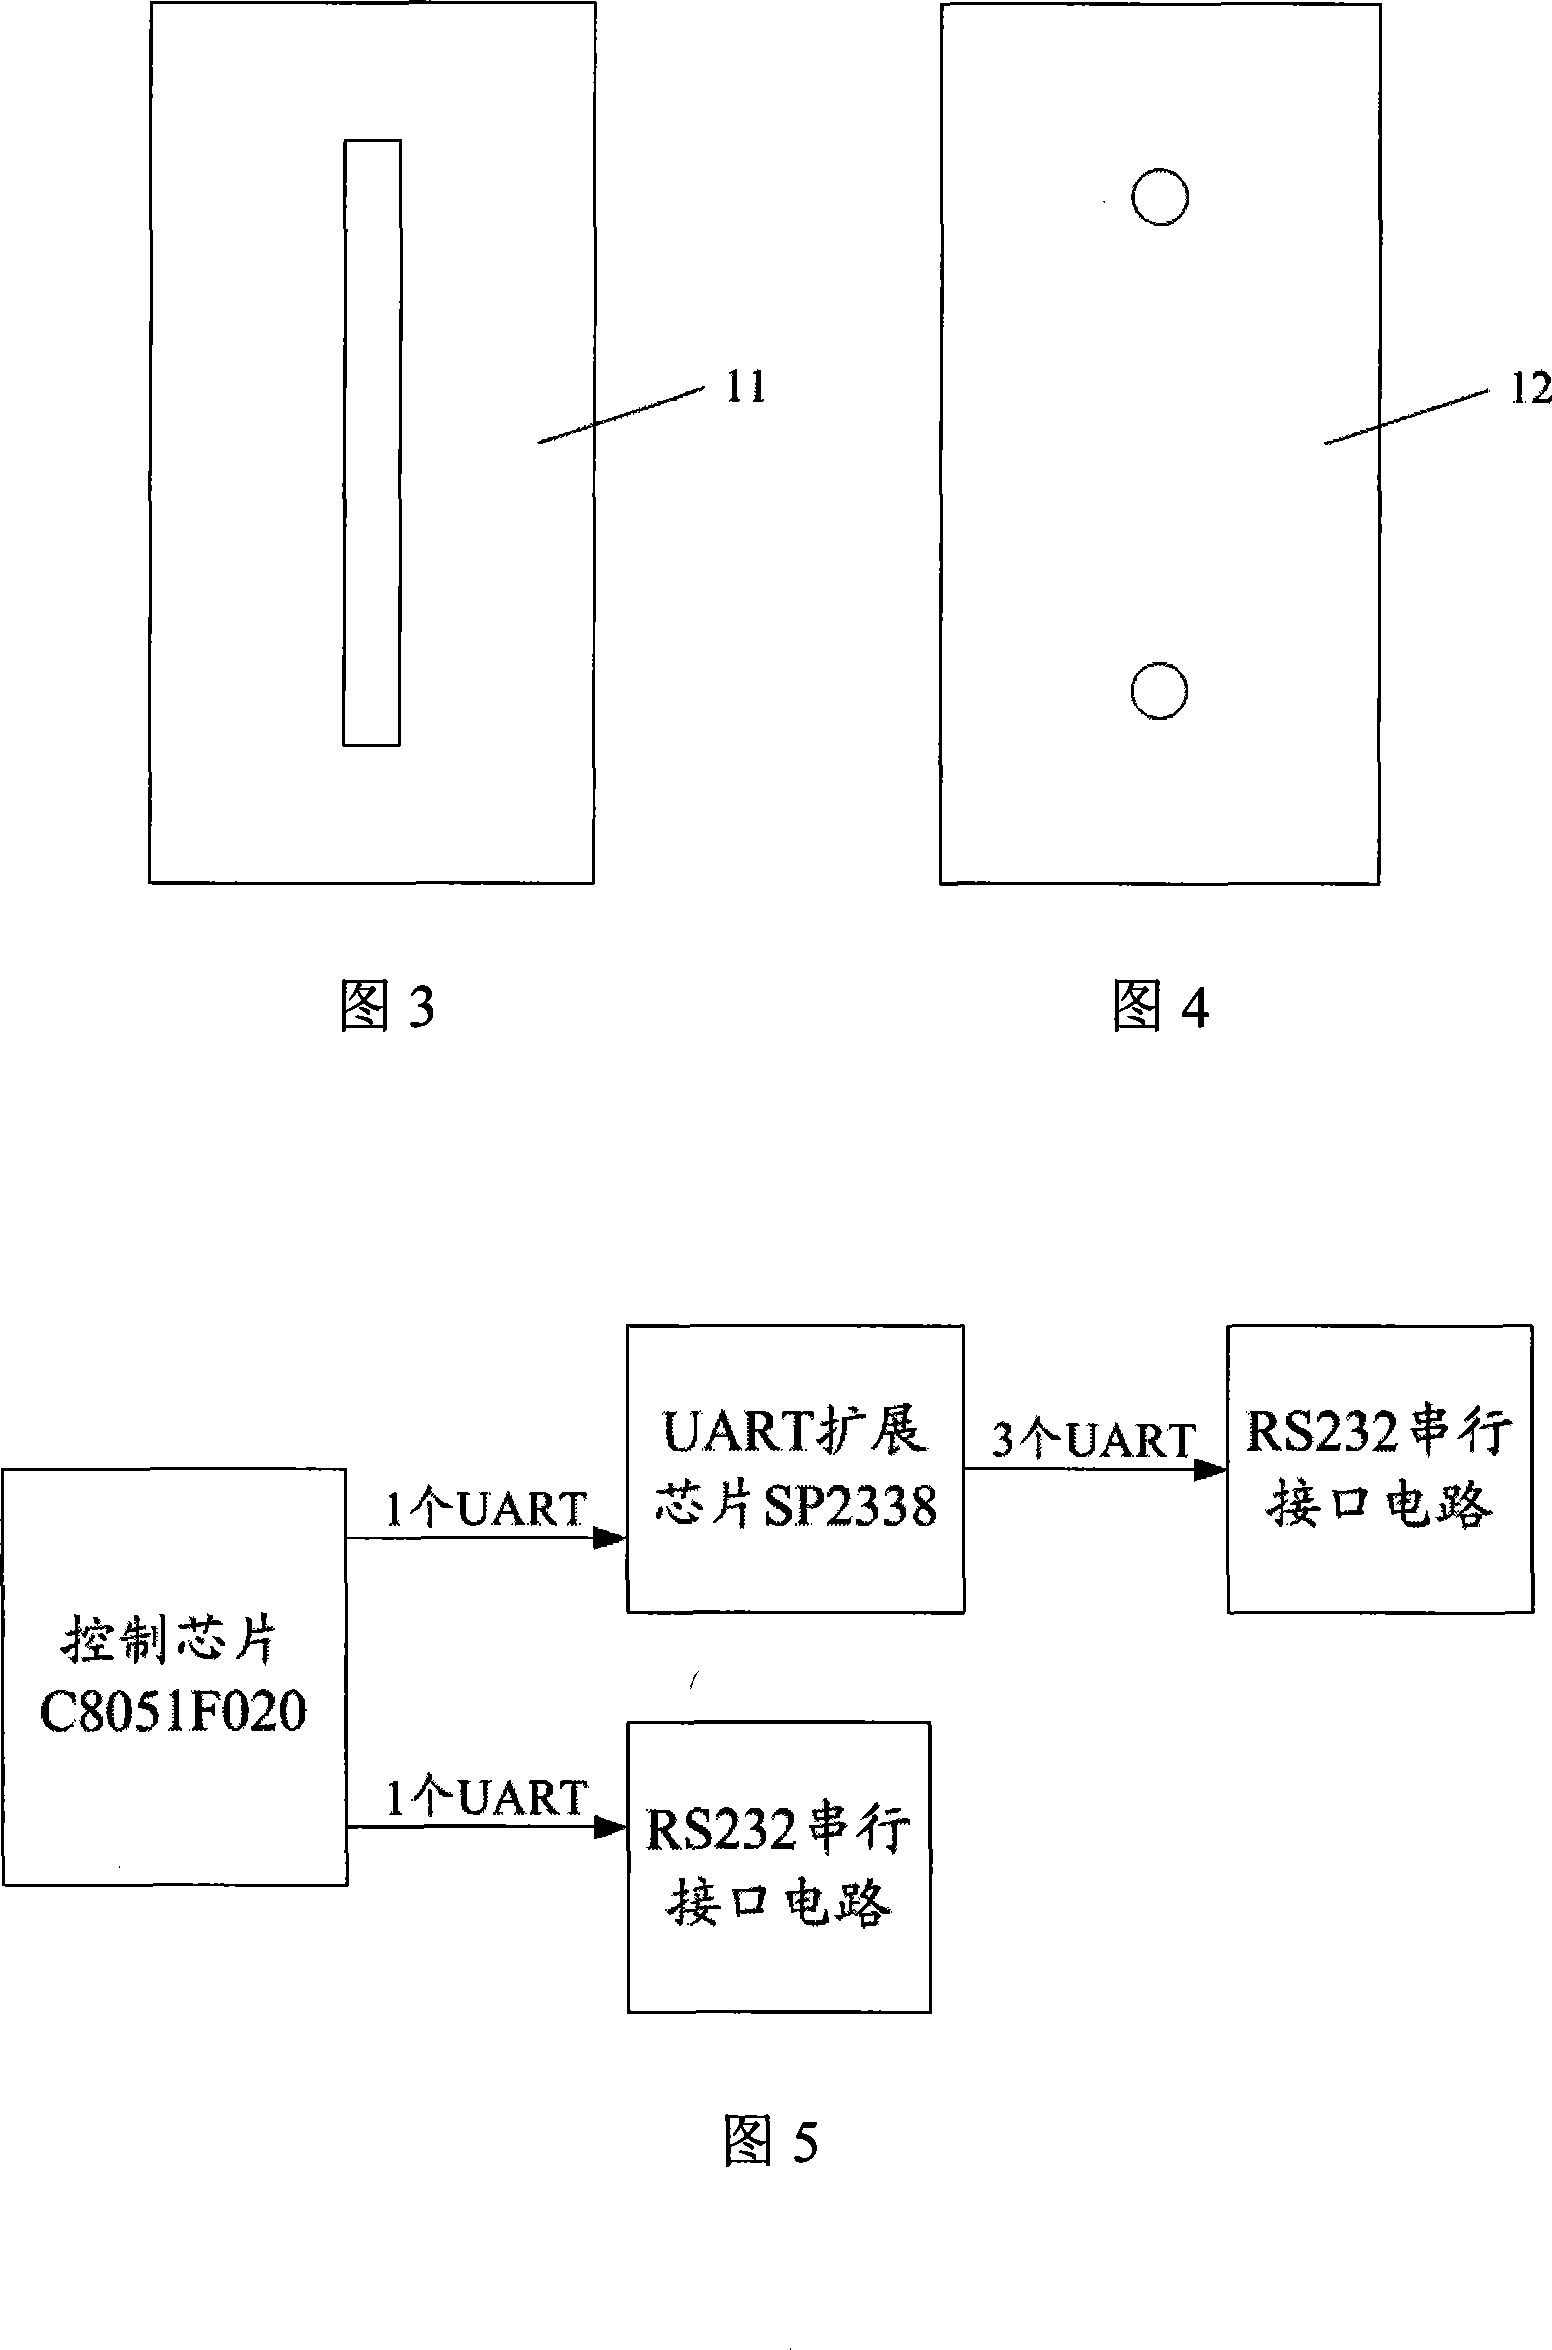 Full-automatic concentration determination apparatus based on surface plasma resonance technology